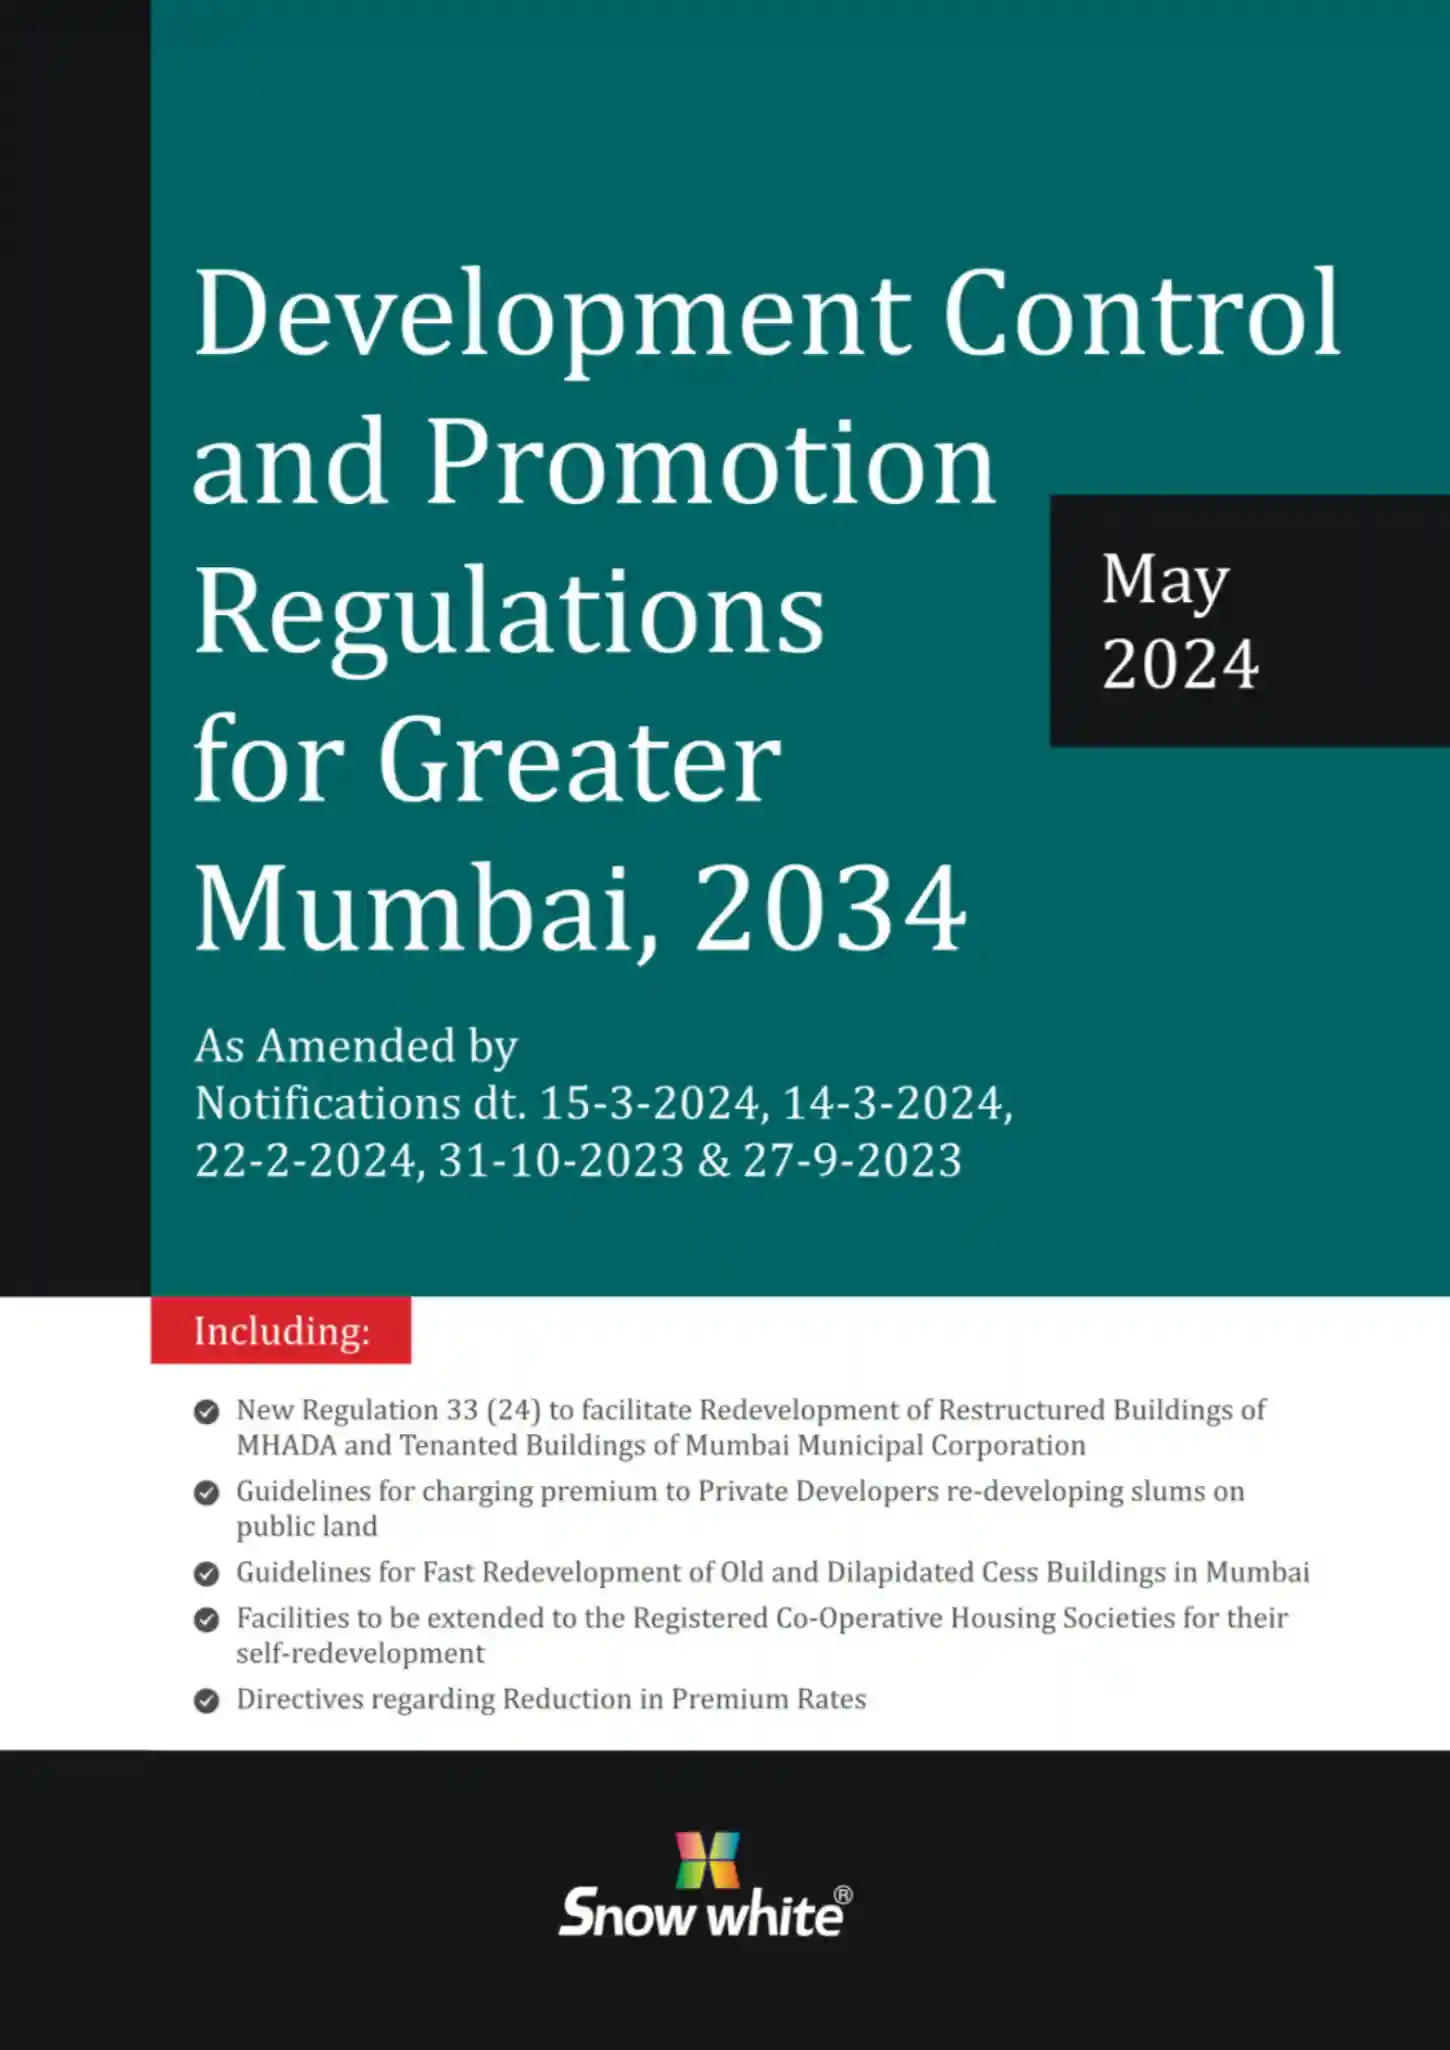 Snow White's Development Control and Promotion Regulations (DCR) for Greater Mumbai, 2034 - May 2024 Edition